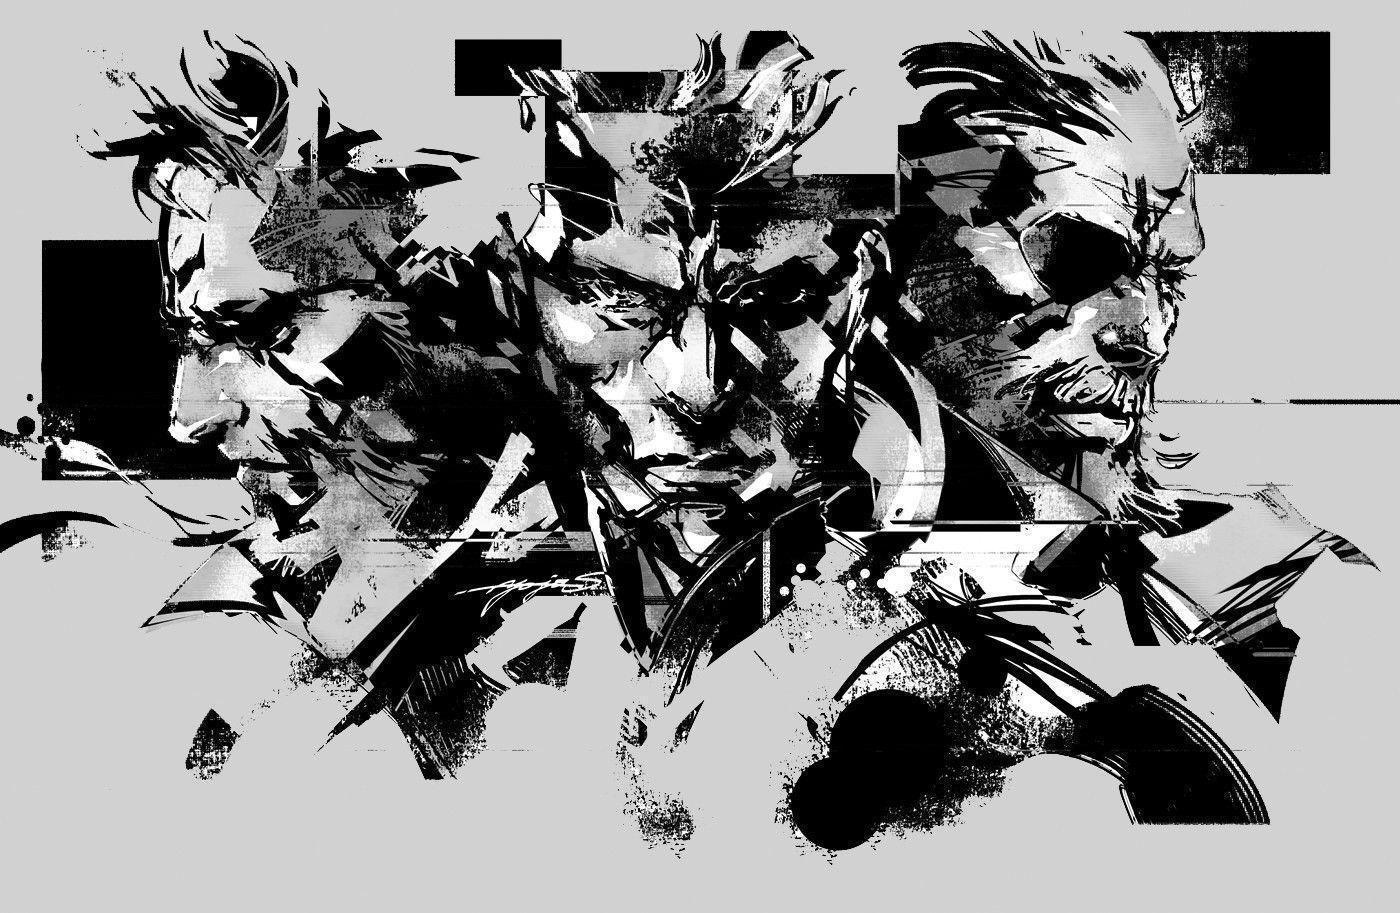 A simple MGS wallpaper I made